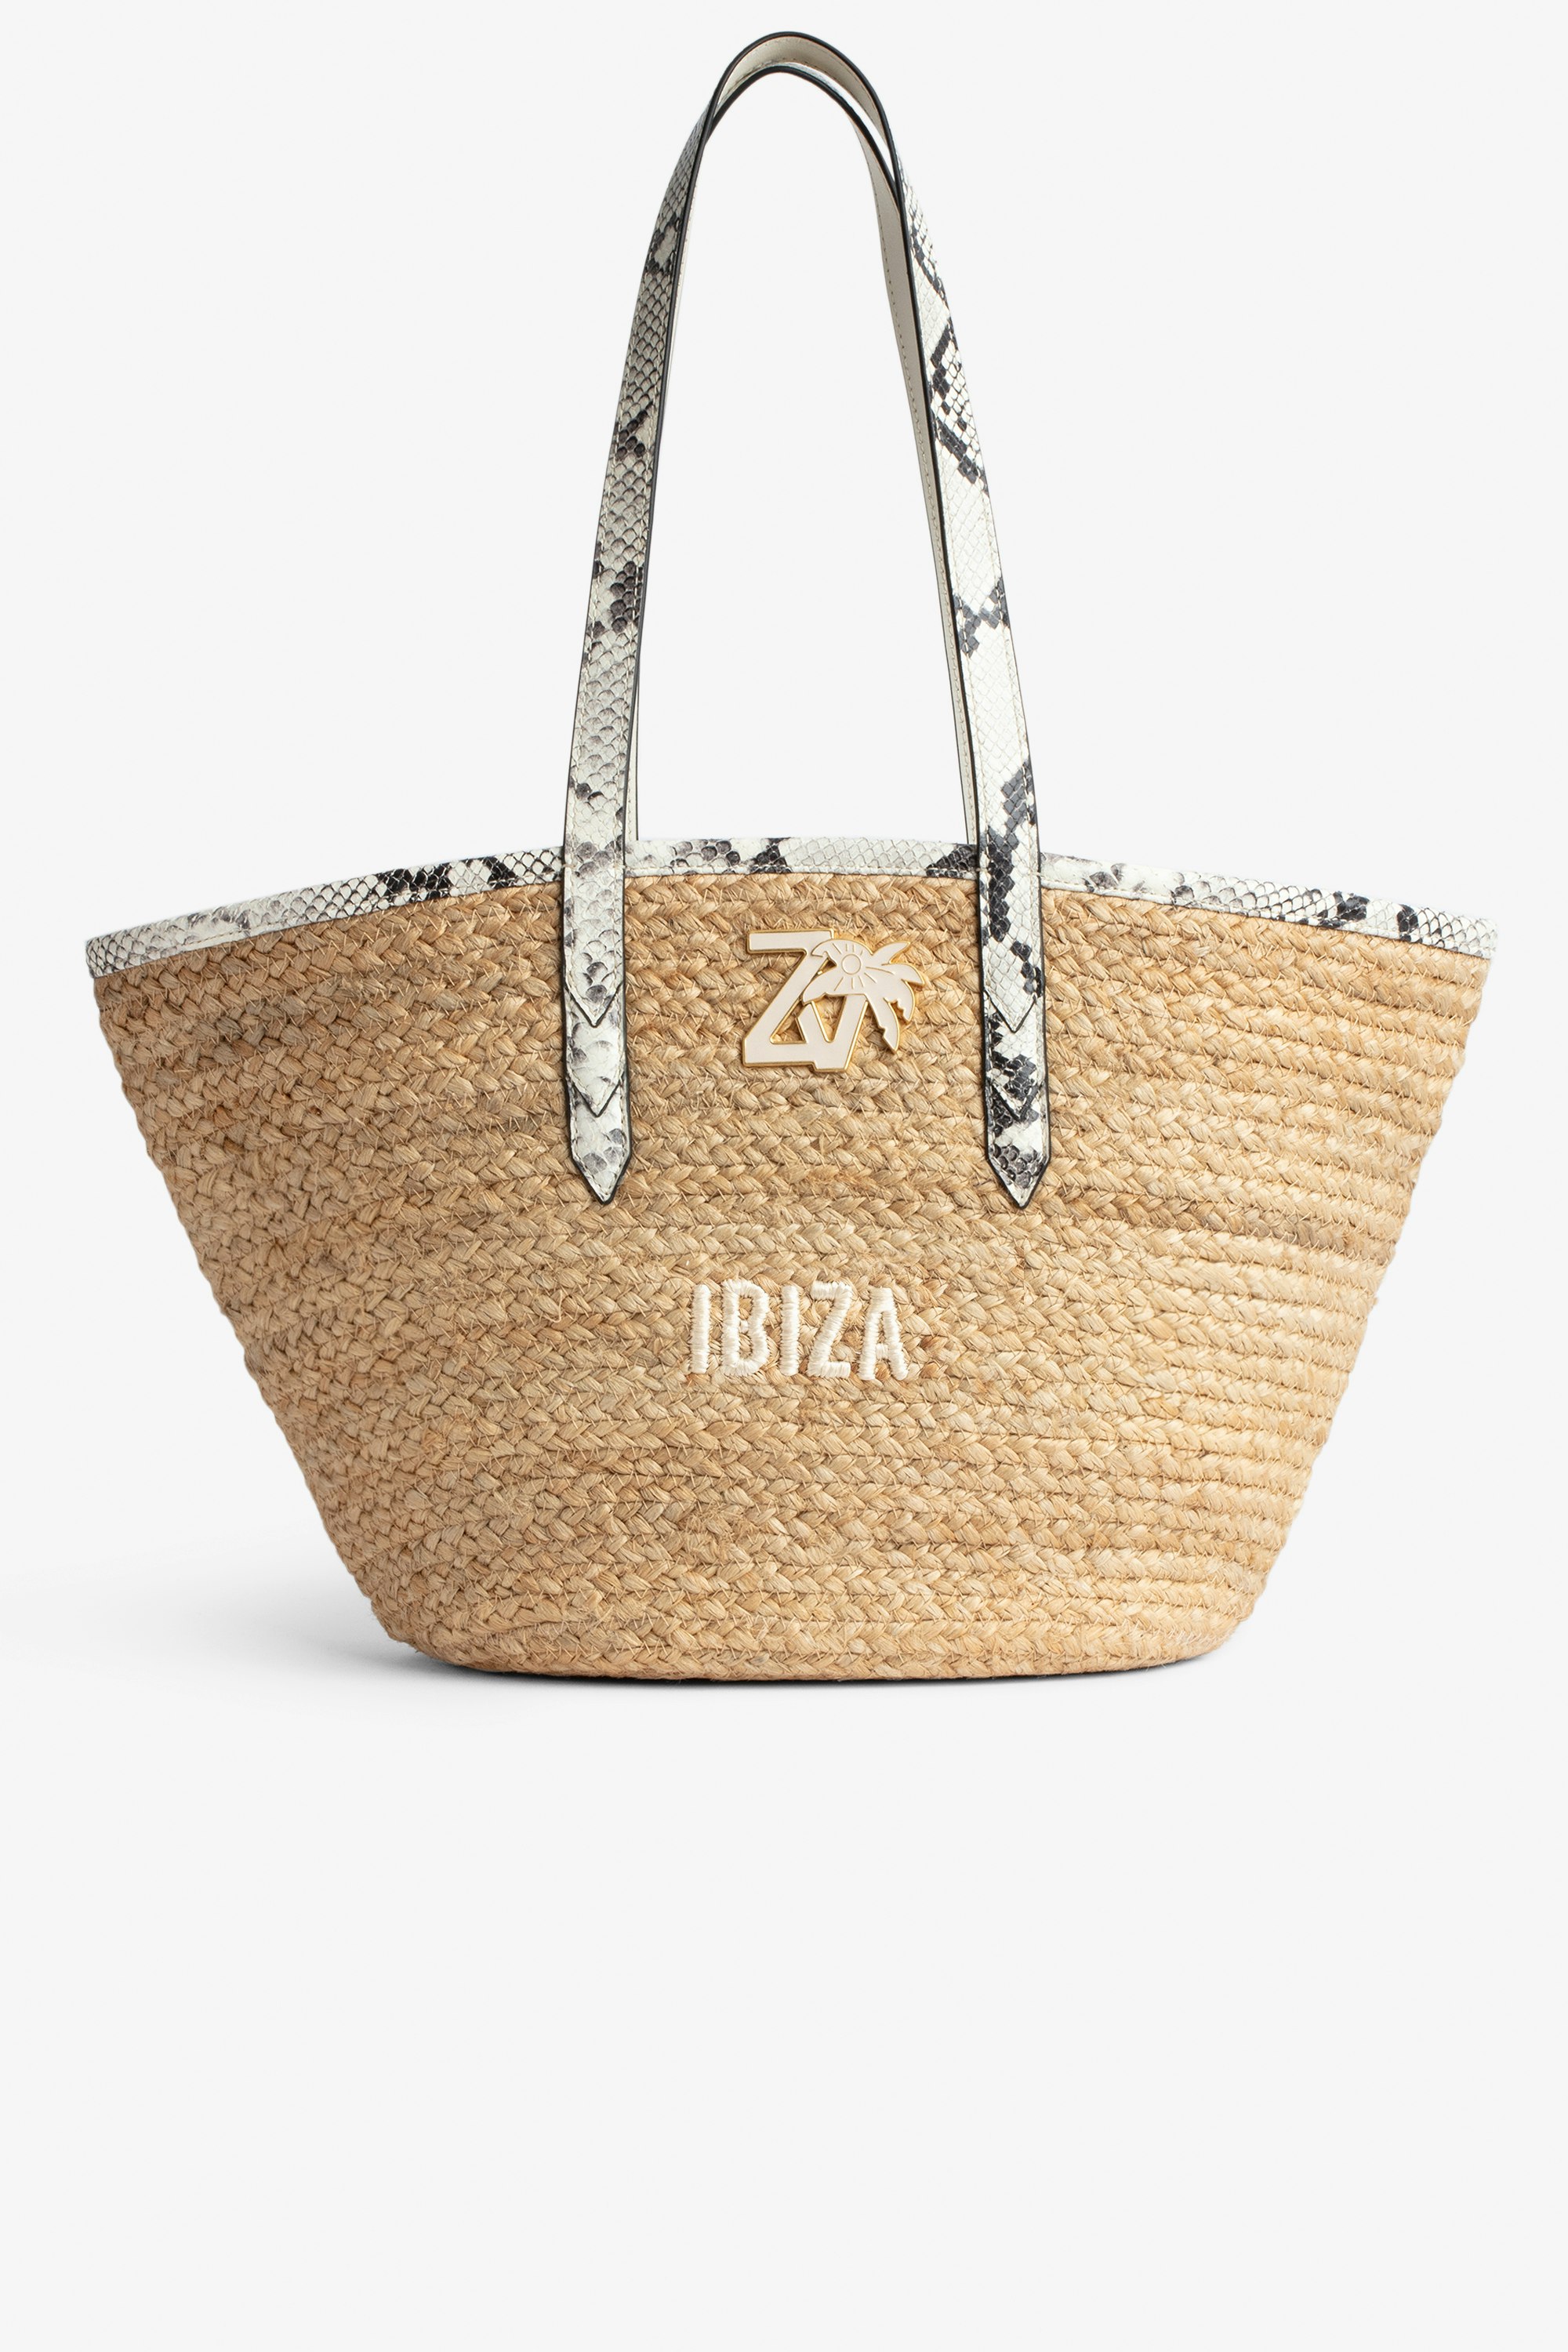 Le Beach Bag - Women's straw bag with off-white snakeskin-effect leather handles, "Ibiza" embroidery and ZV charm